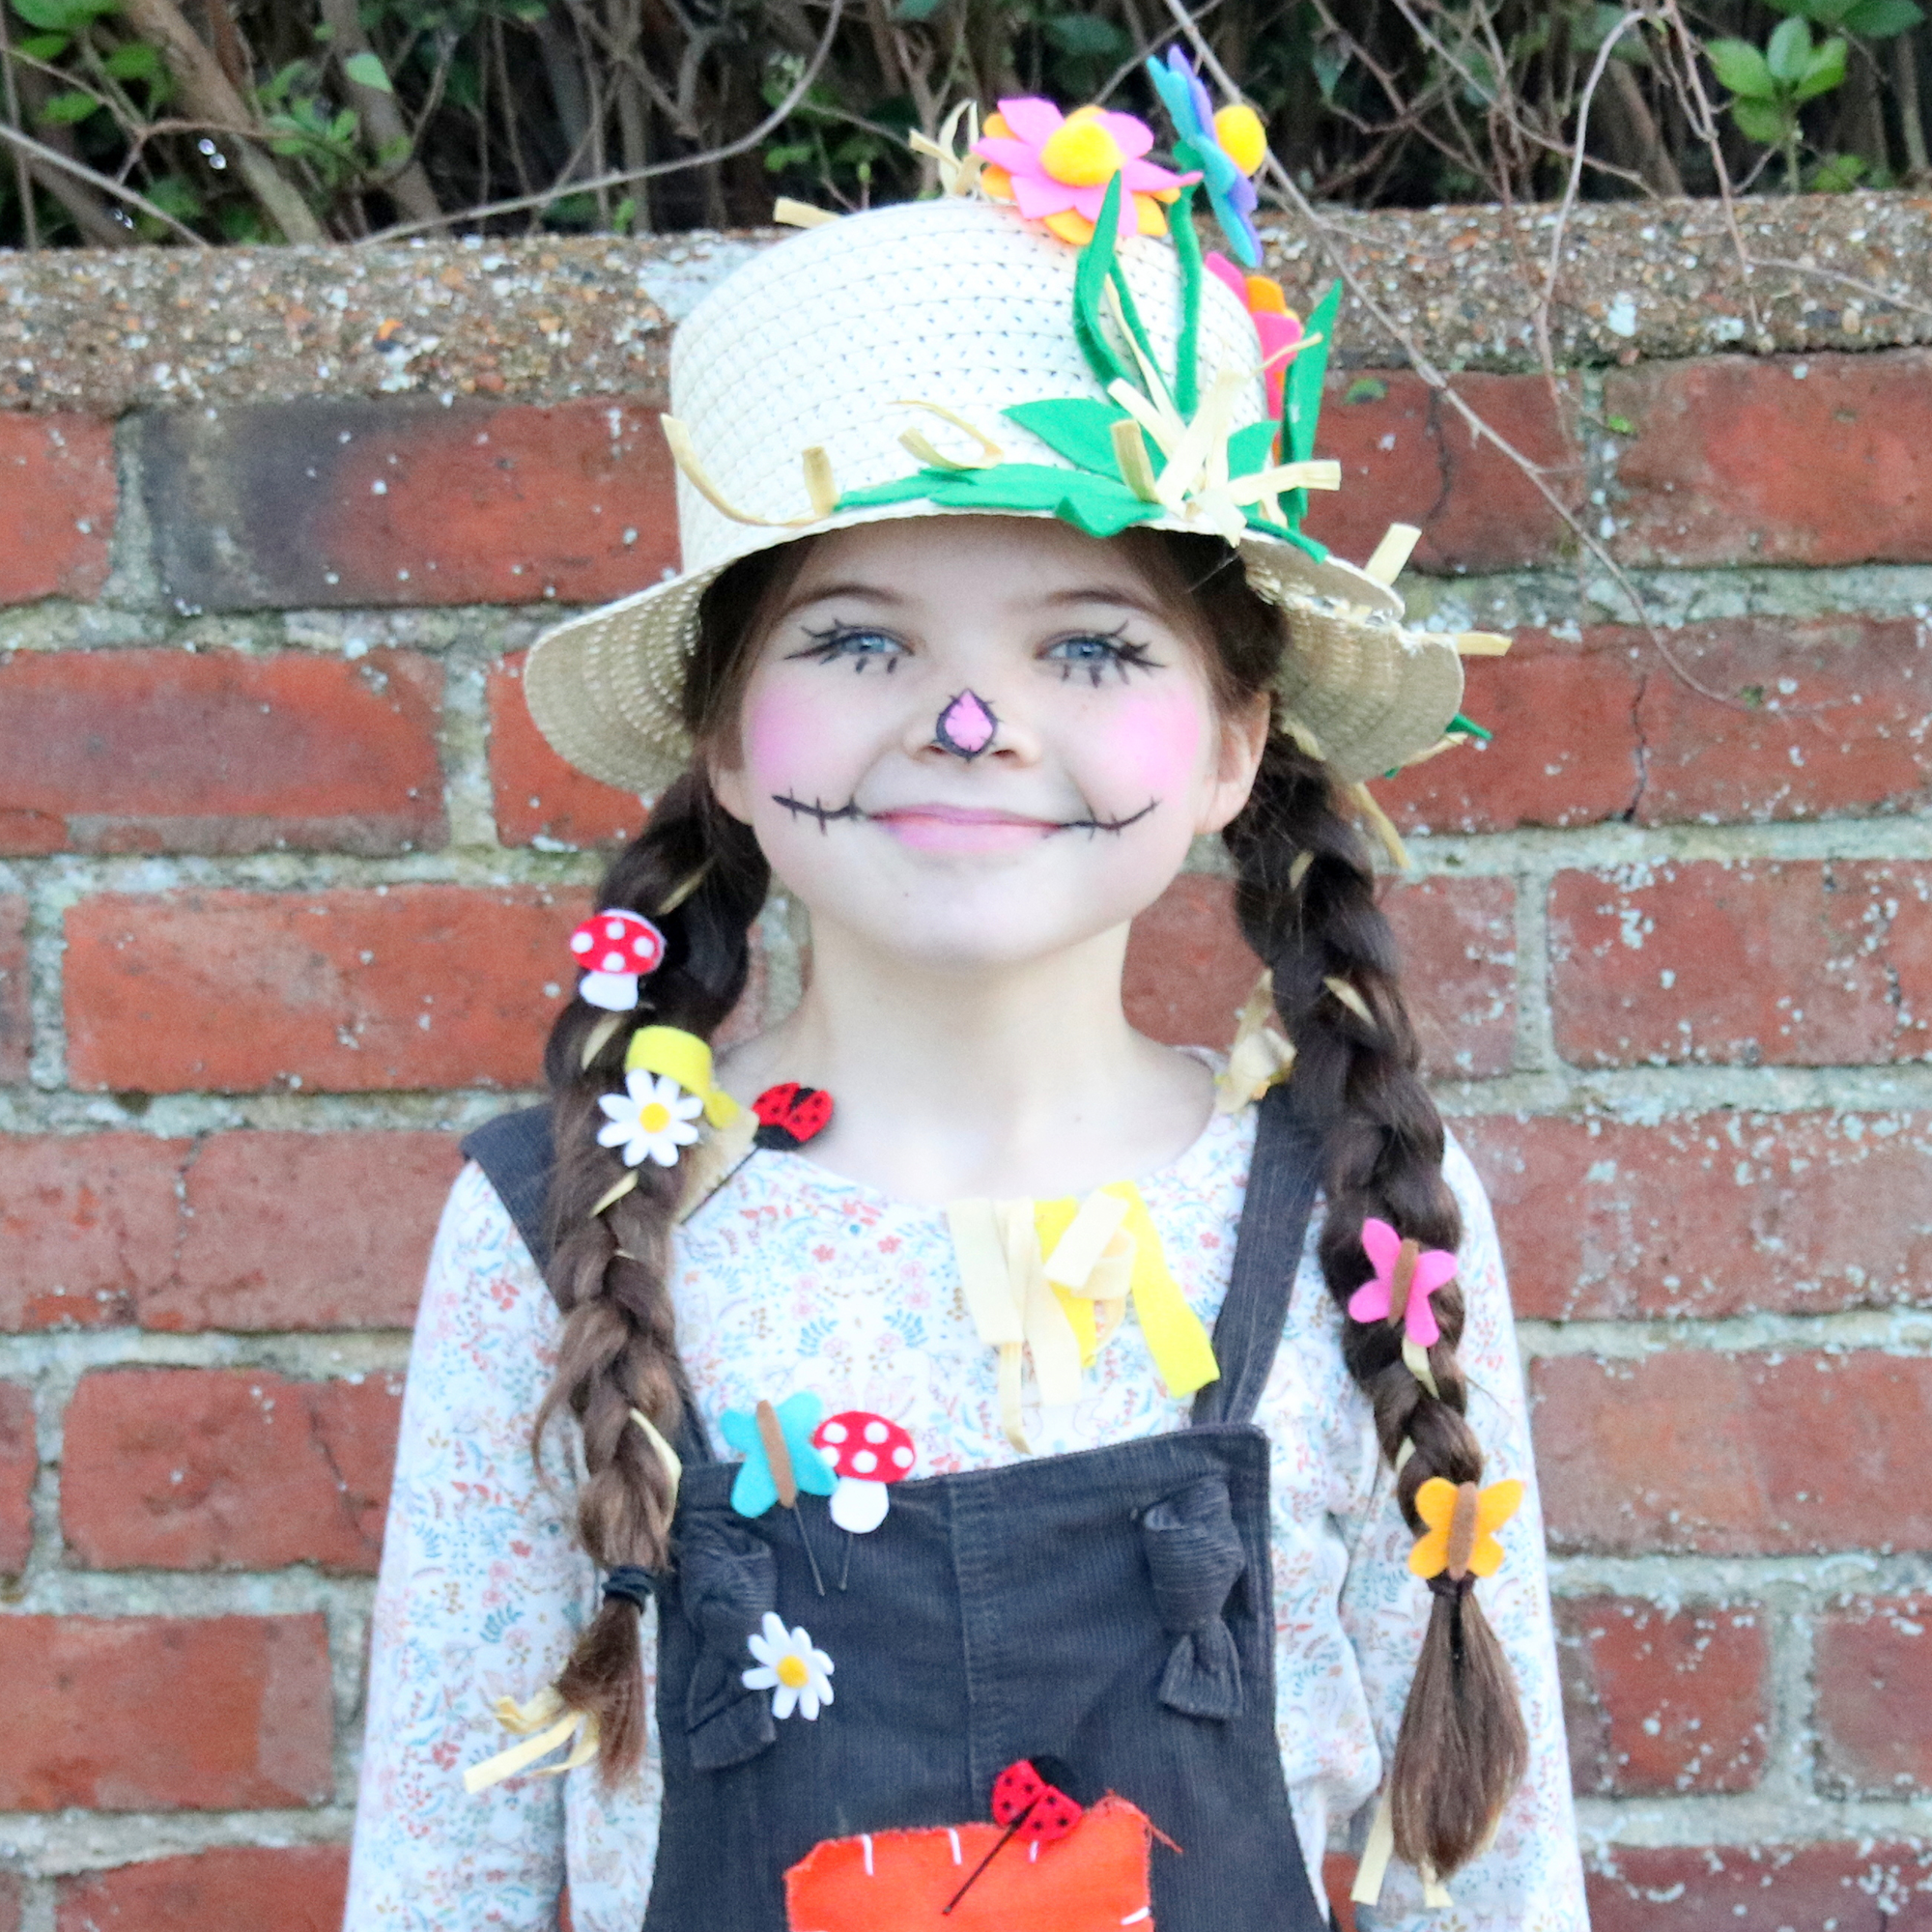 How to Make a Kids' Scarecrow Costume